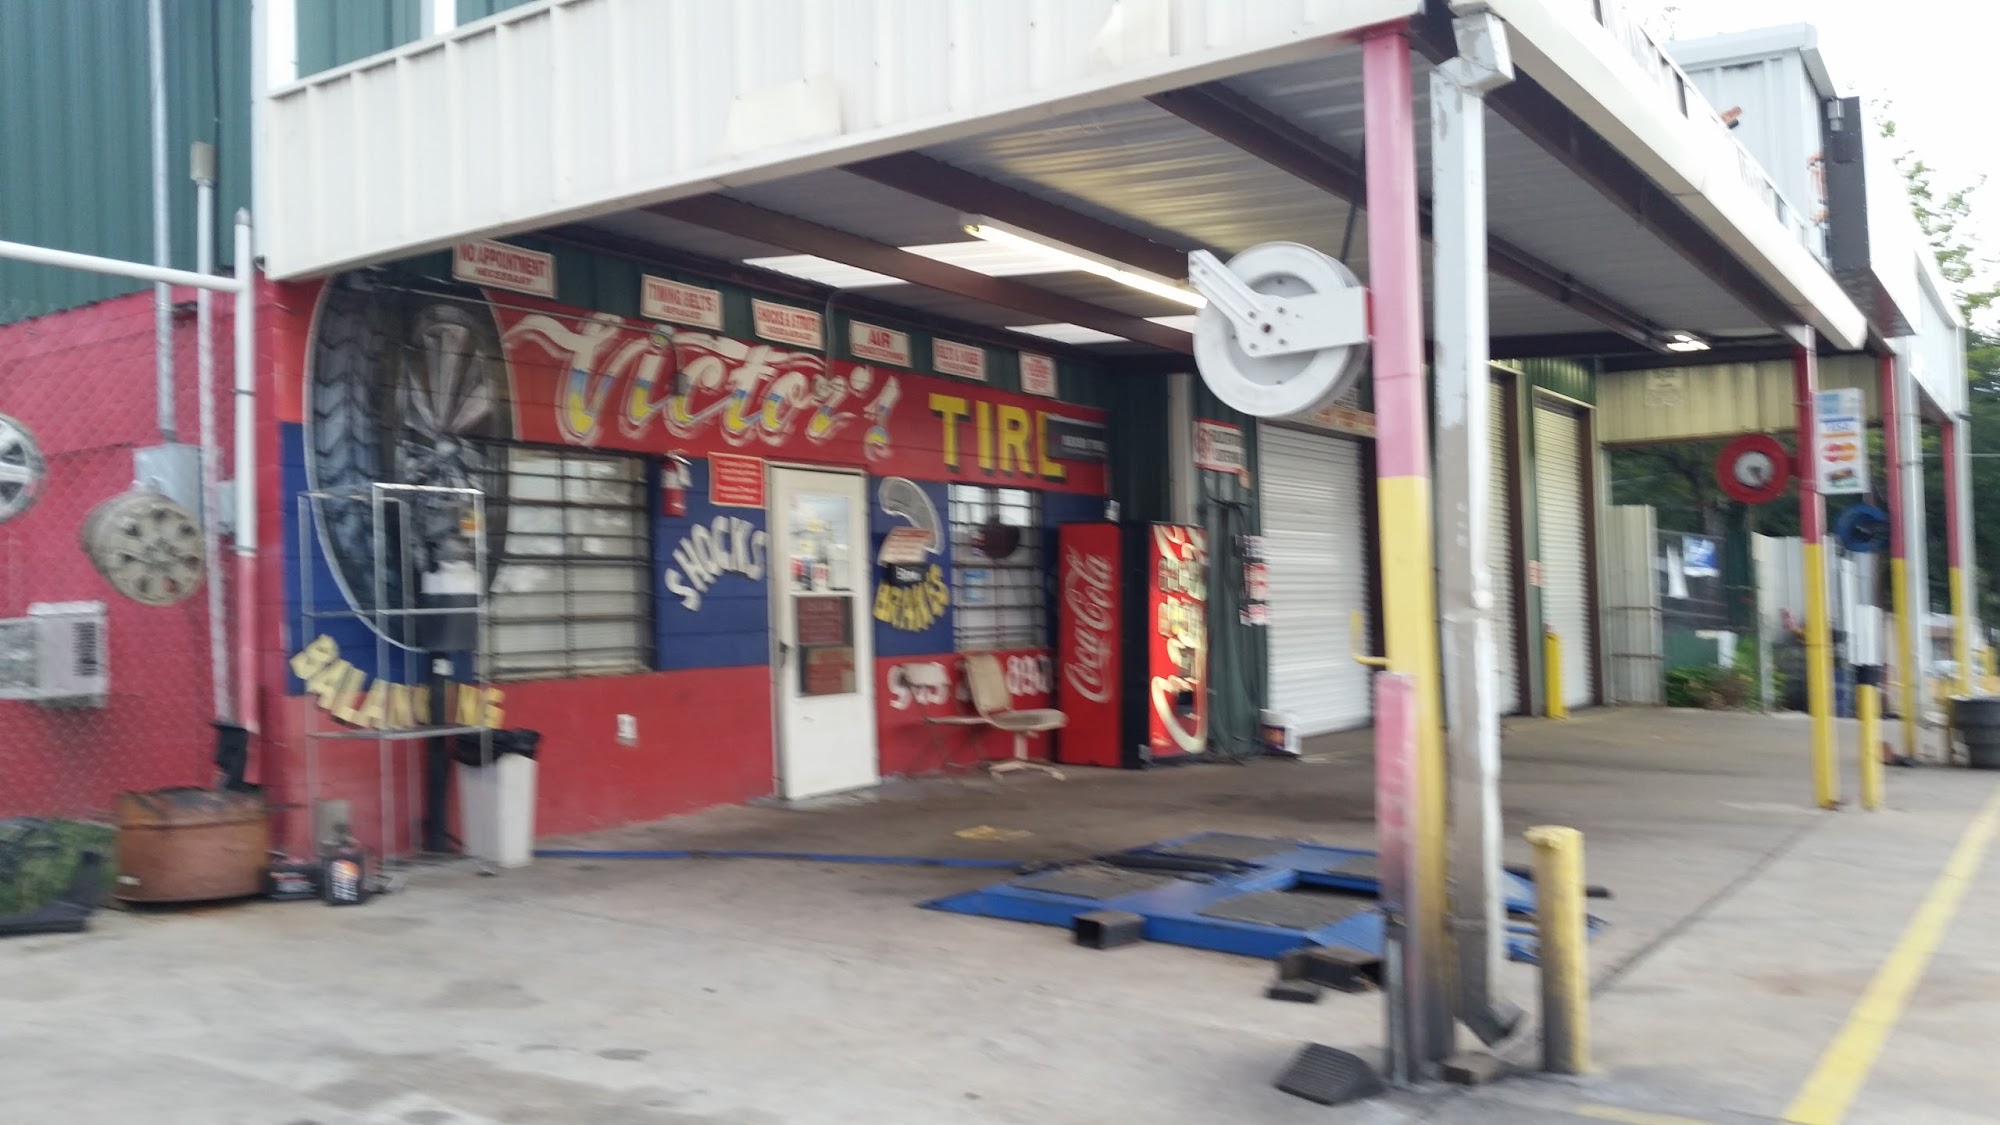 Victor's Tire Shop